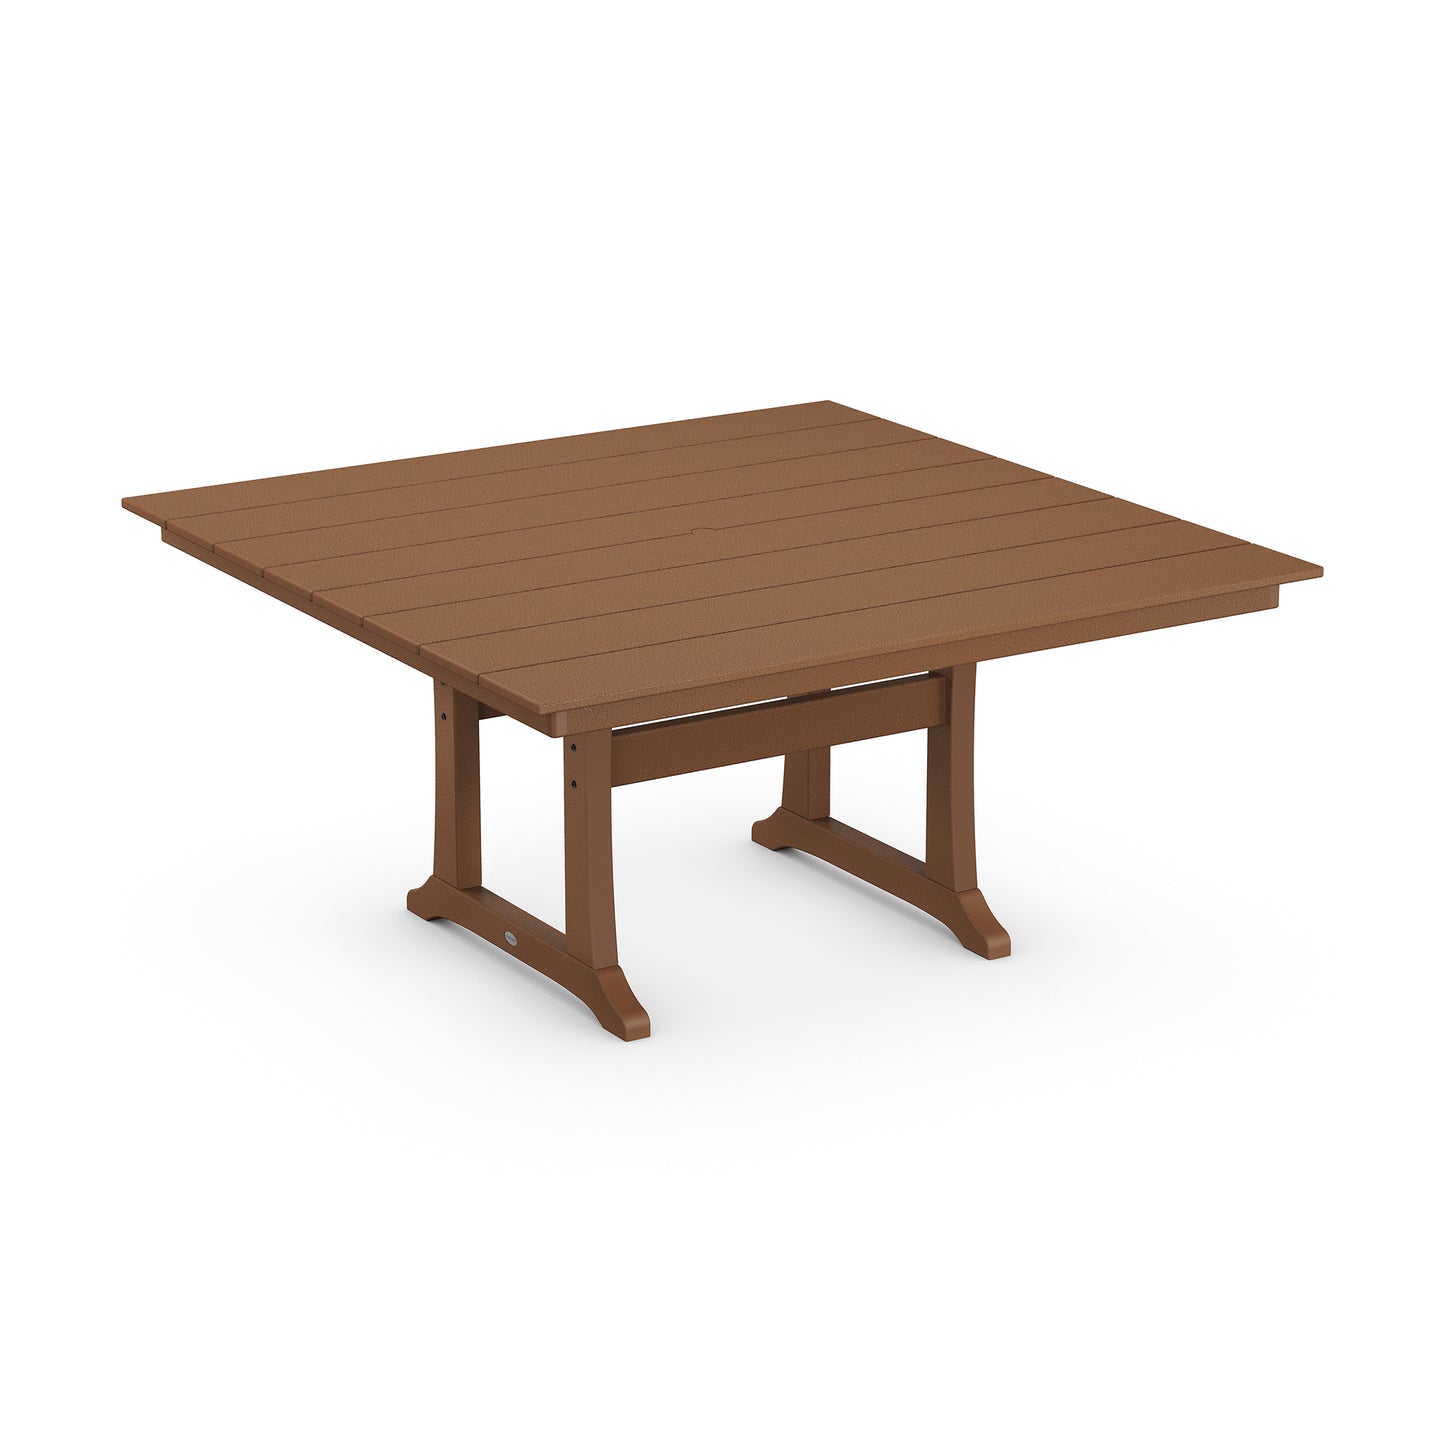 A digital image of a POLYWOOD Farmhouse Trestle 59" Dining Table with a plank design and sturdy legs made from POLYWOOD® lumber on a plain white background.